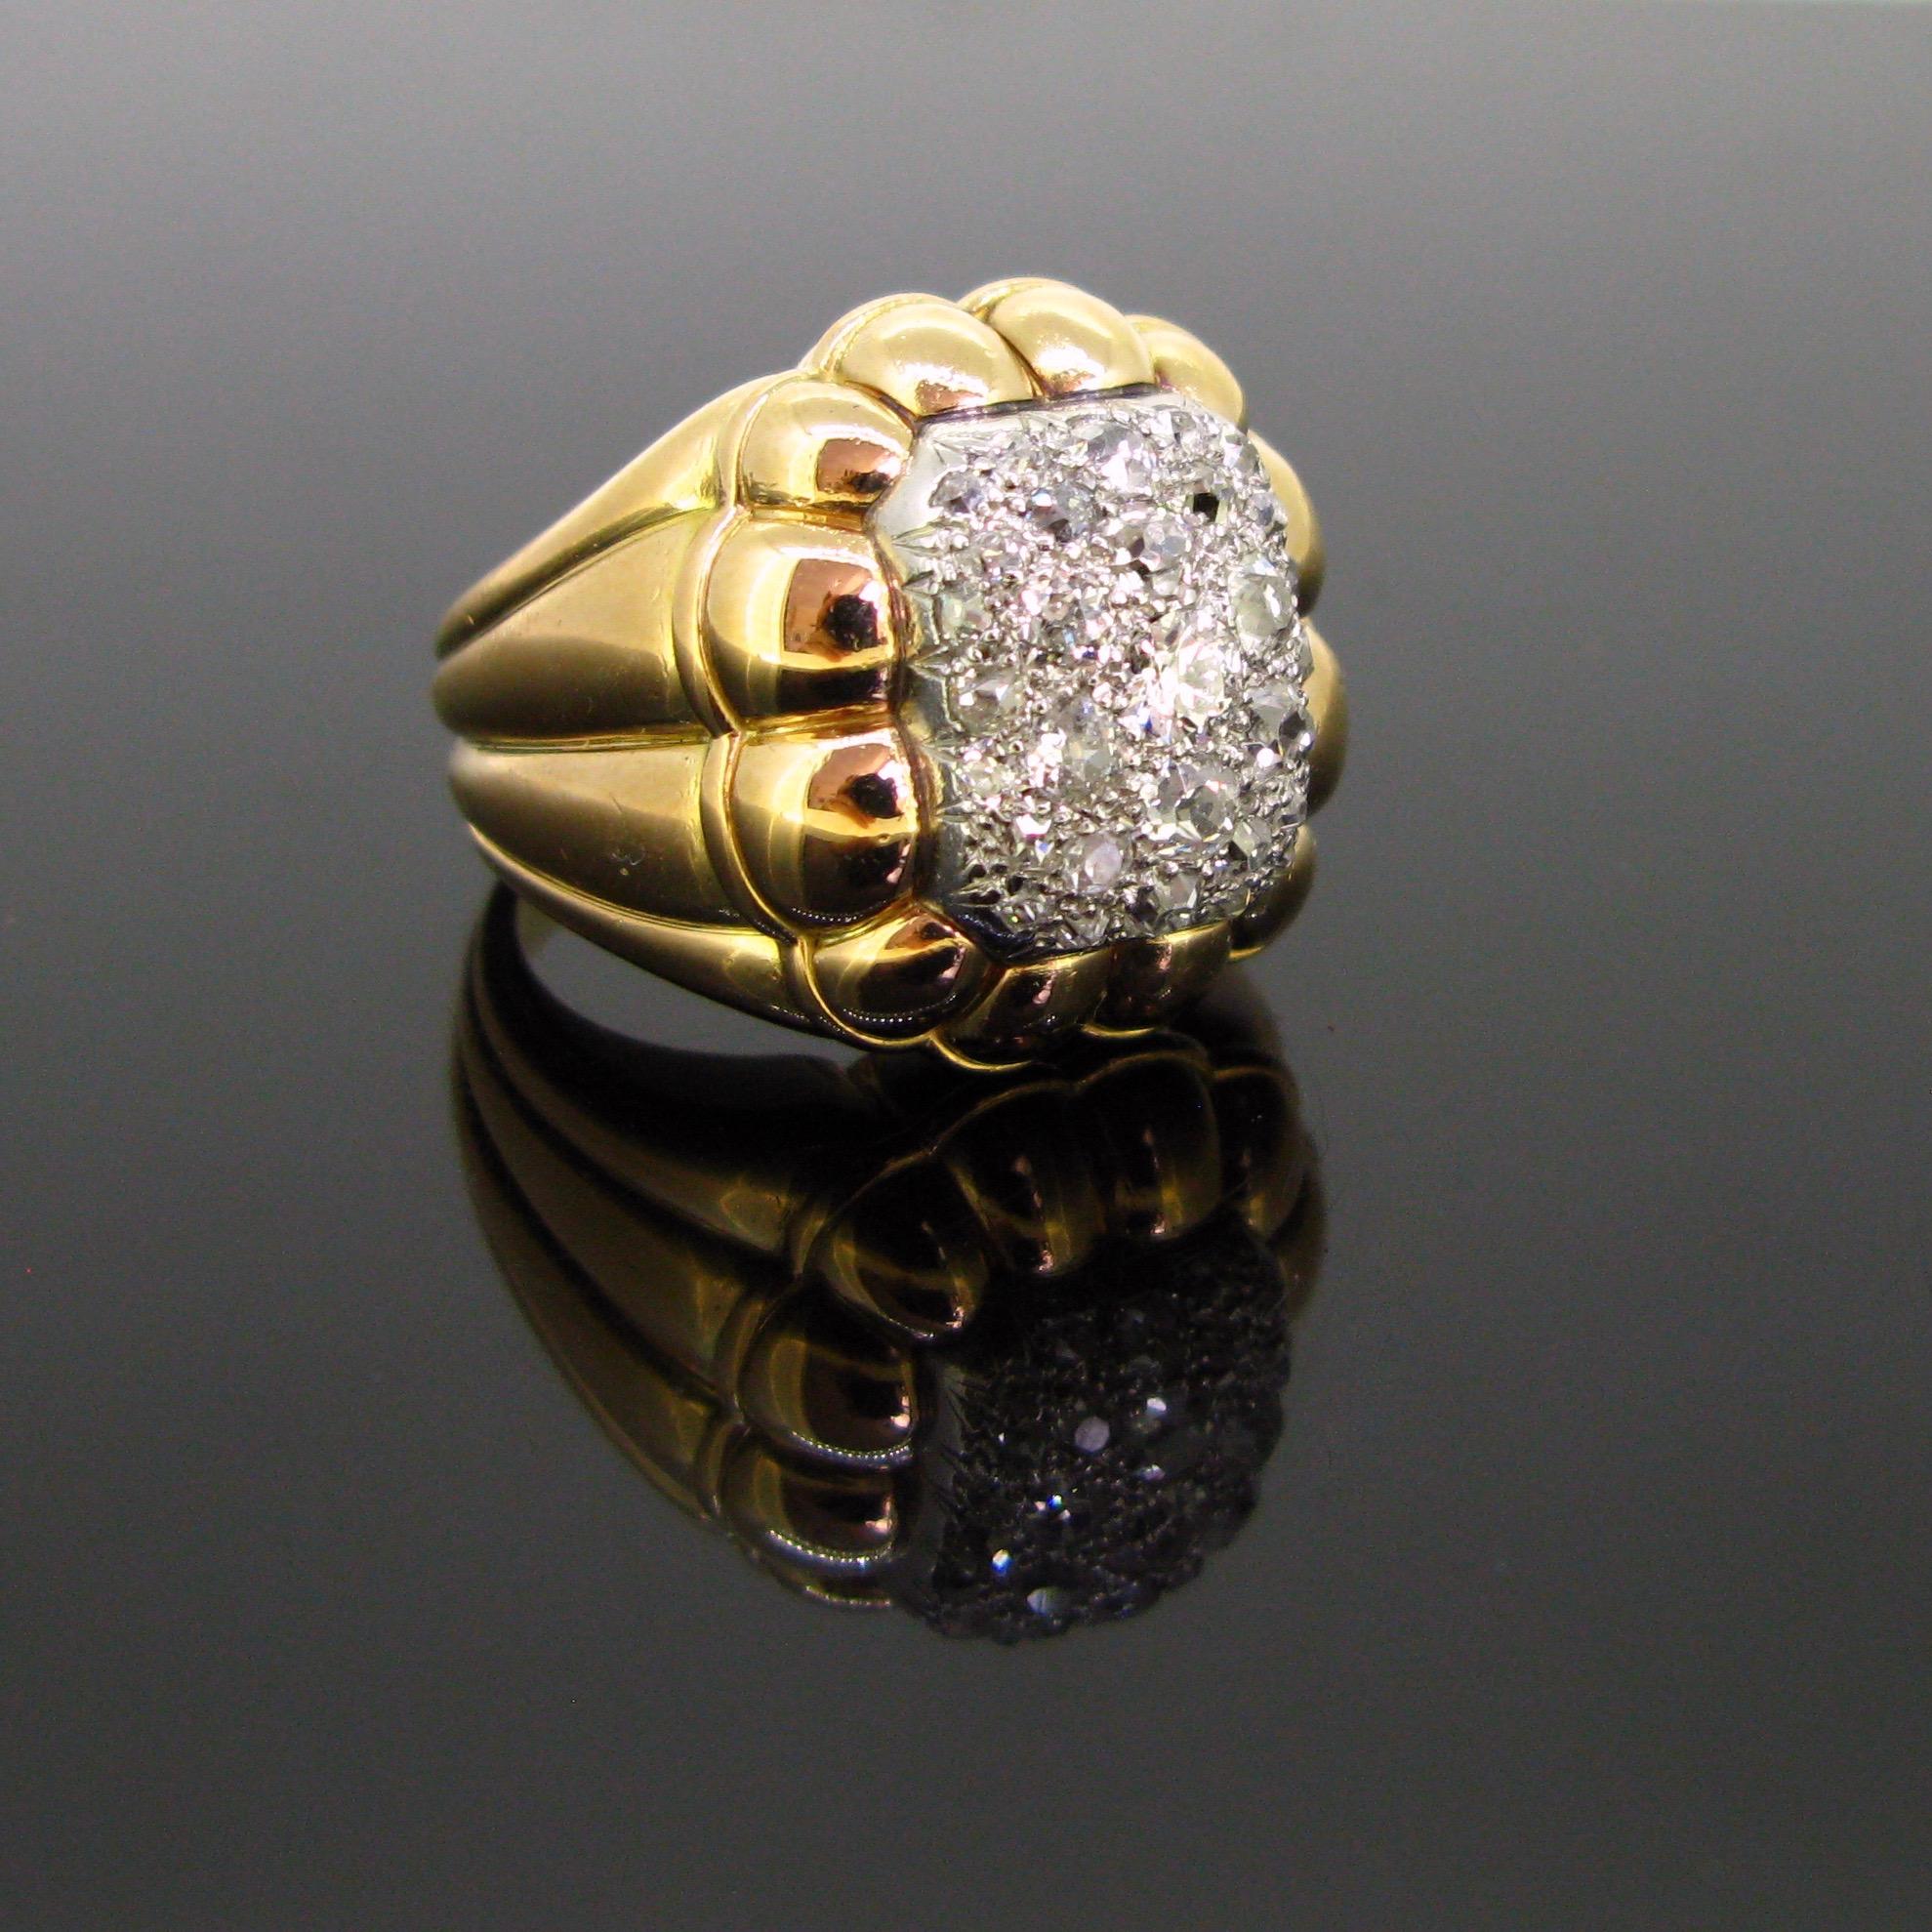 Ring Size: 62 – 9 ¾ - T ½

Weight: 13,35gr

Metal: 18kt yellow gold and platinum

Condition: Very good

Hallmarks: 29 Diamonds
• Cut: Old mine
• Total carat weight: 2.50ct approximately
• Colour: I/J
• Clarity: SI

Hallmarks: French, eagle’s